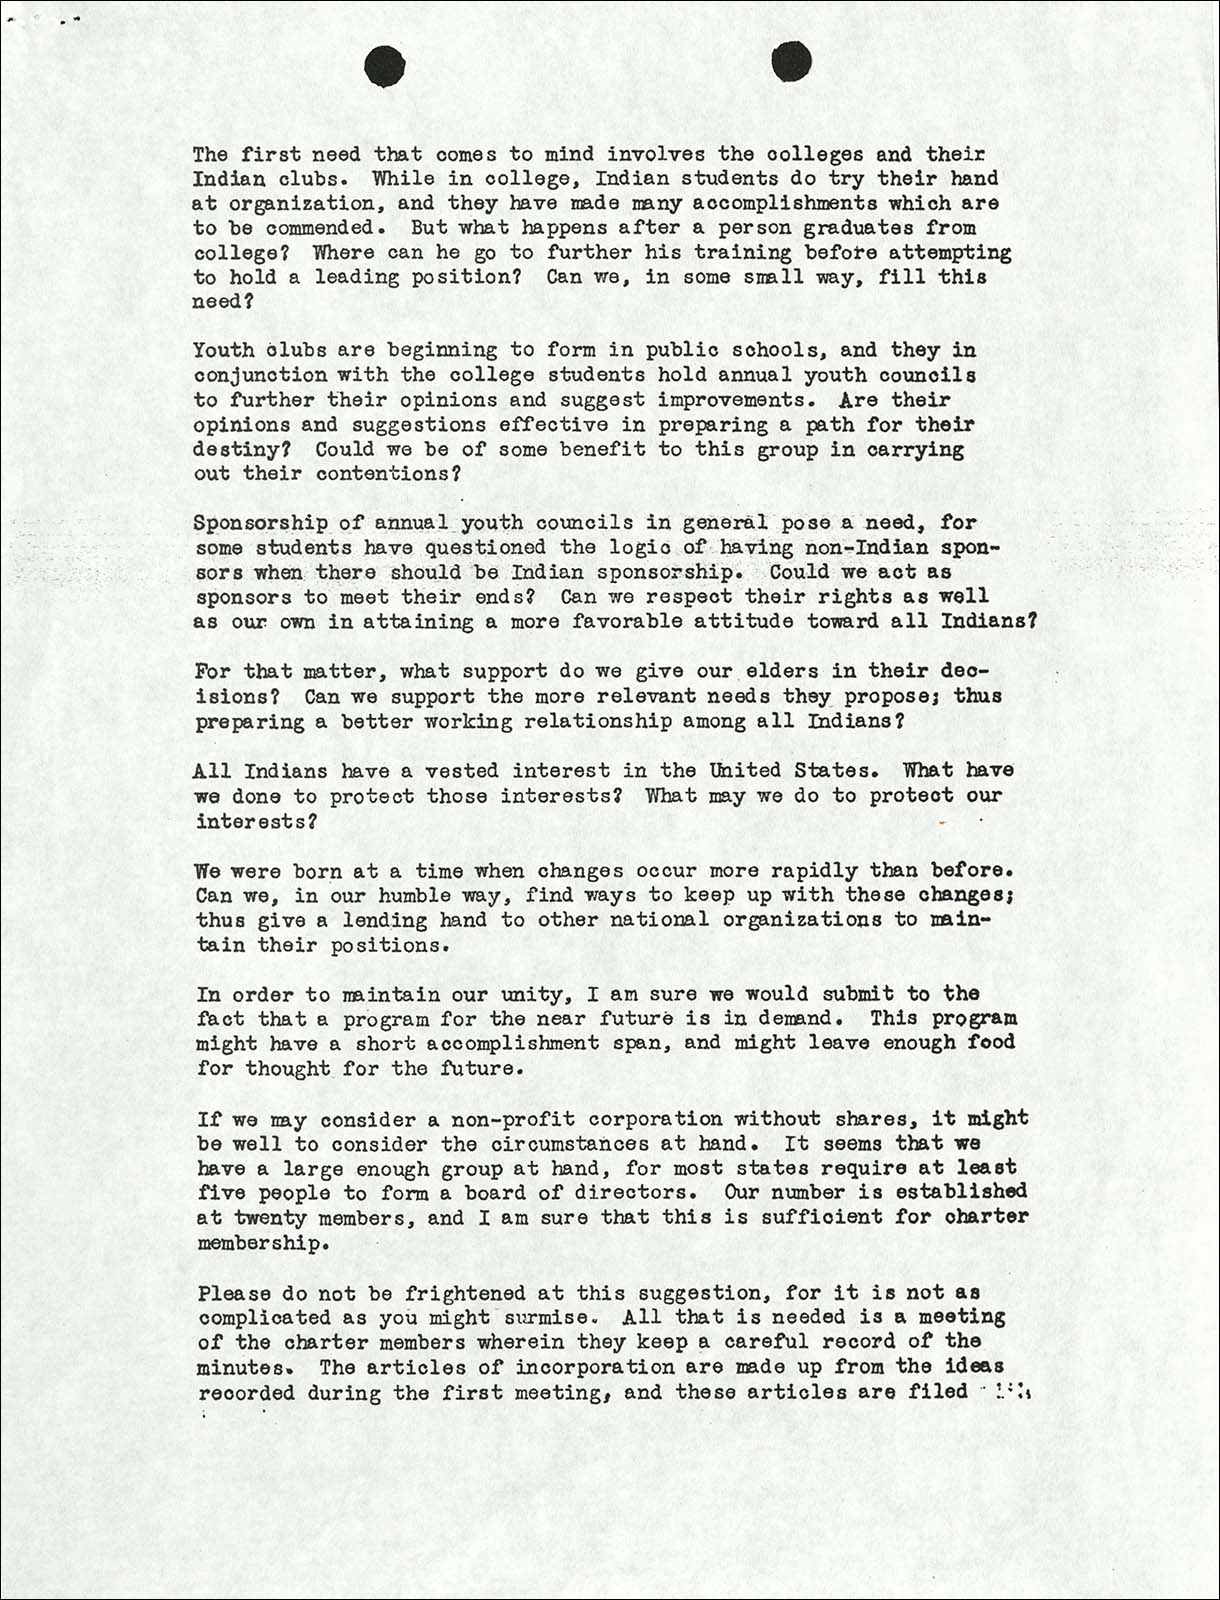 Letter from Herb Blatchford to Mel Thom, page 2